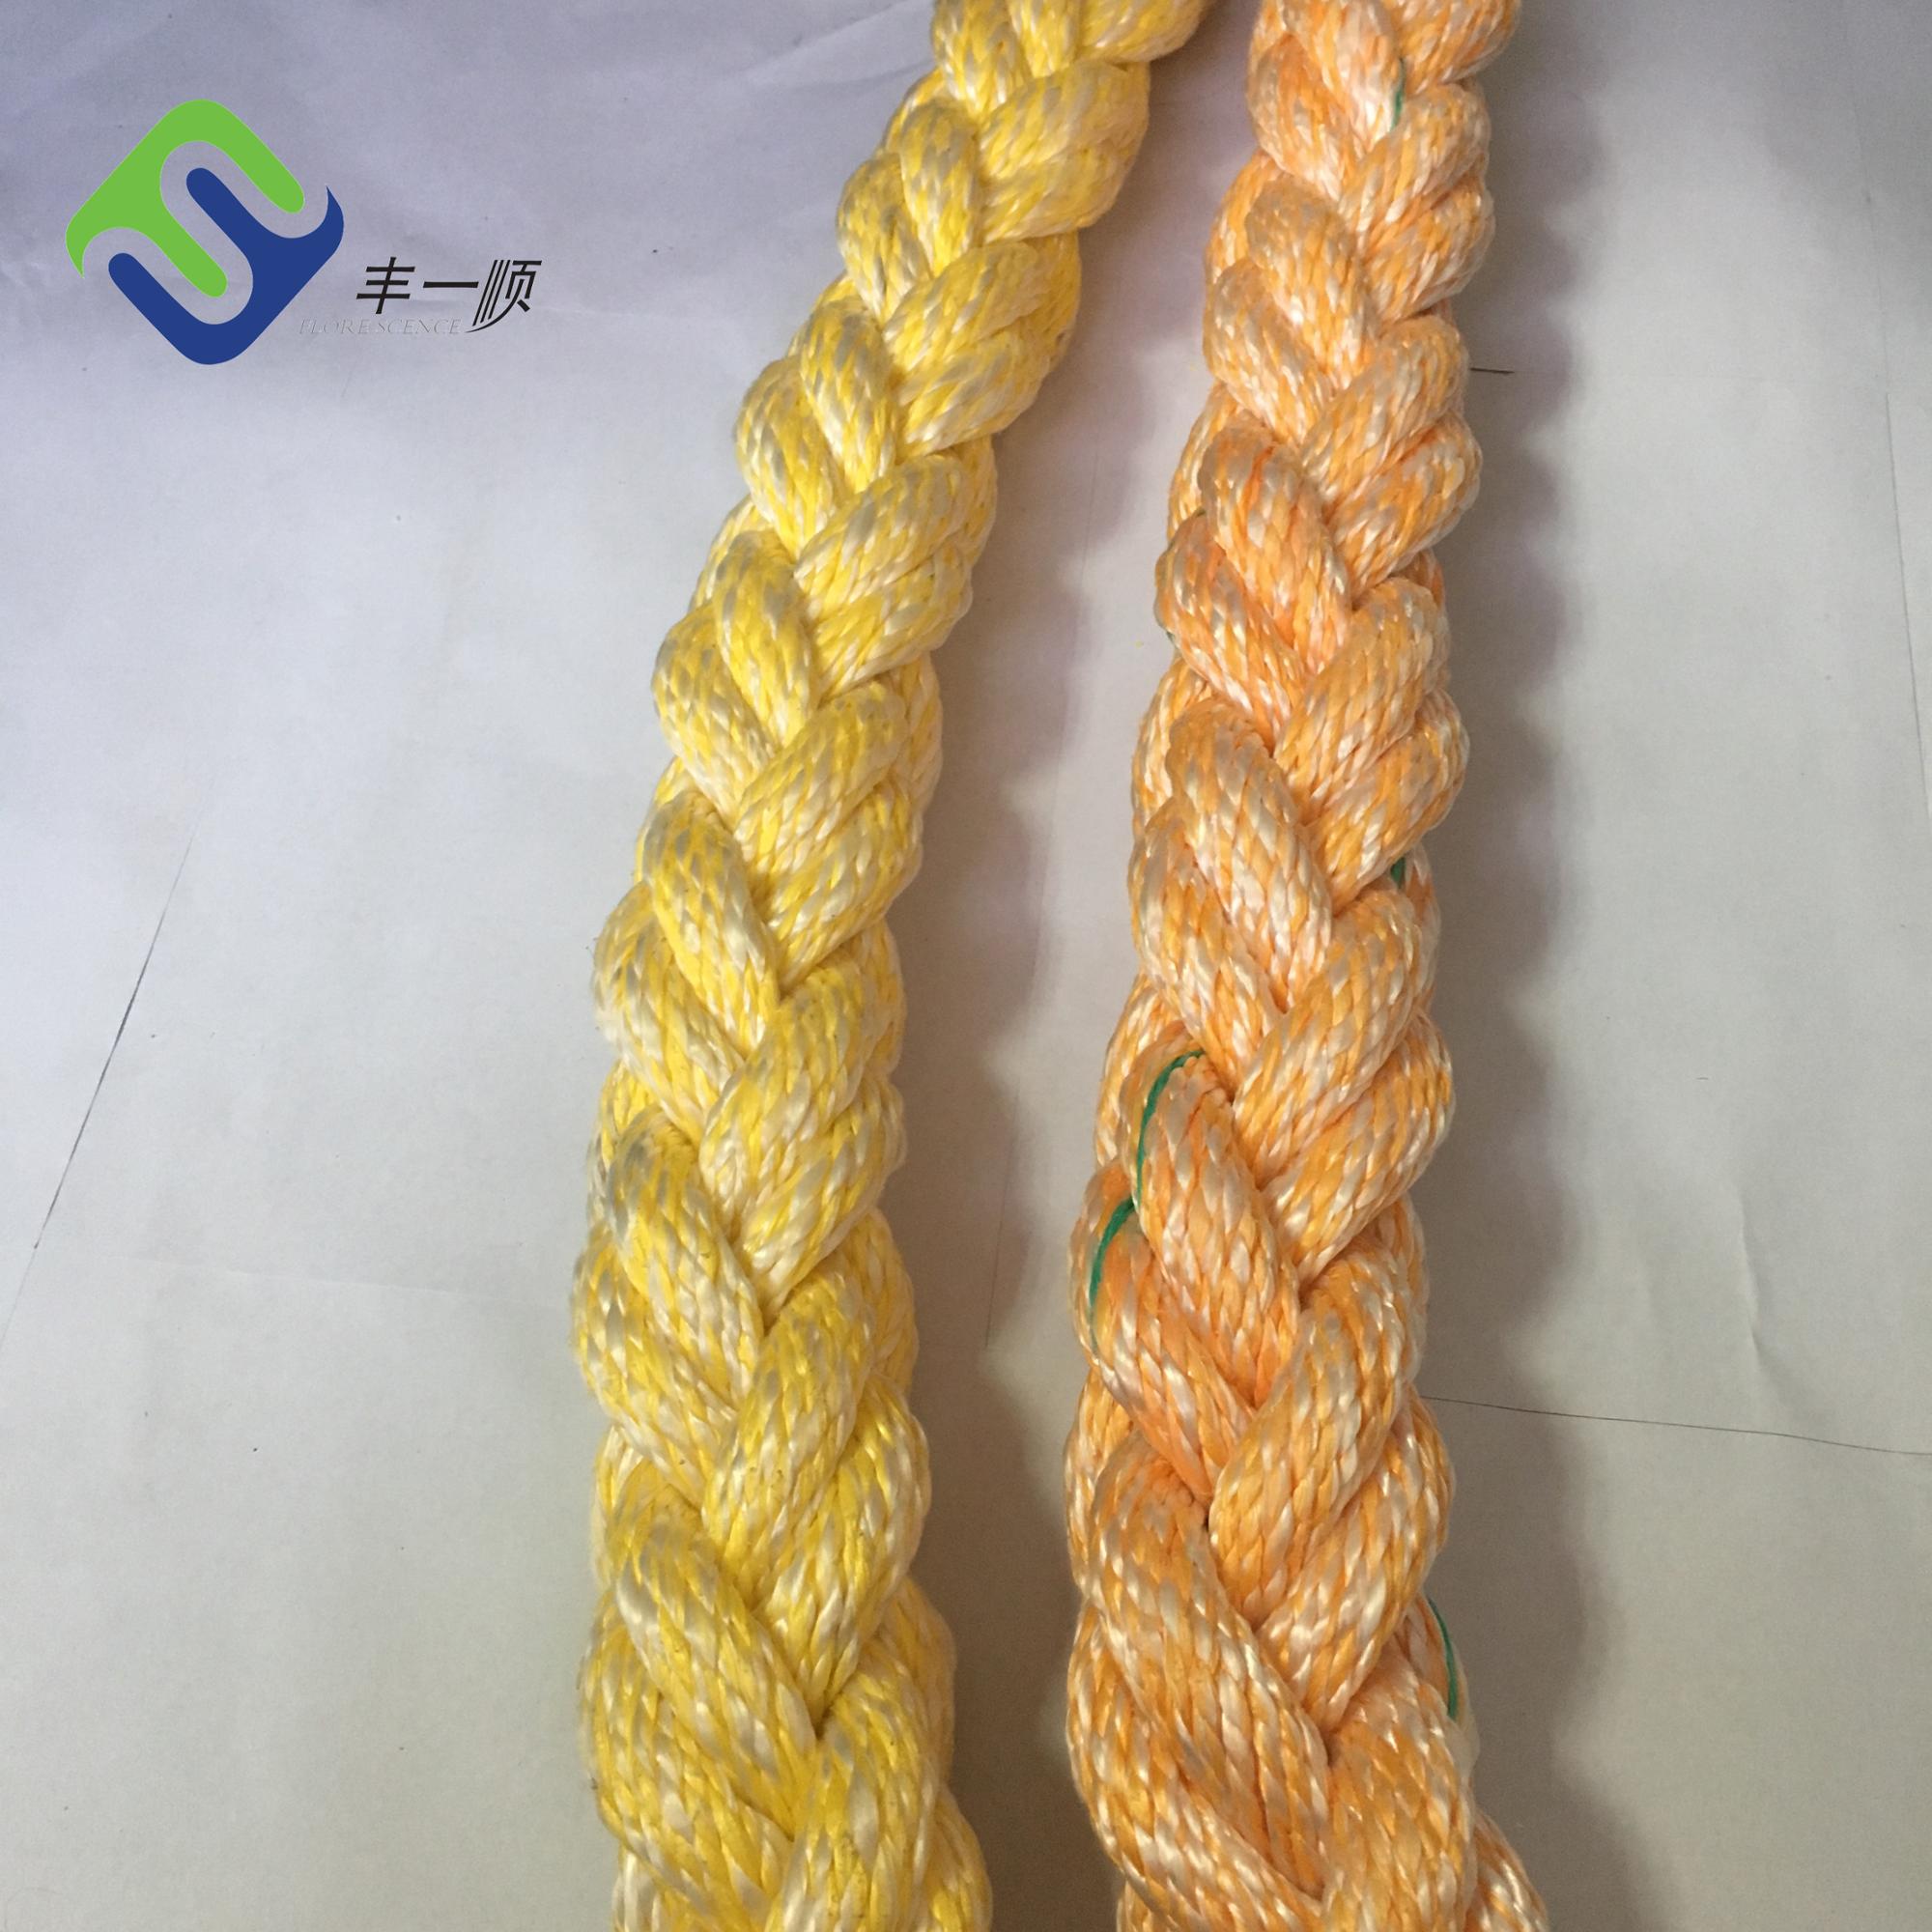 Manufacturing Companies for Twisted Cotton Rope - Yellow Marine mooring 8 strand PP and Polyester mixed rope for sale  – Florescence